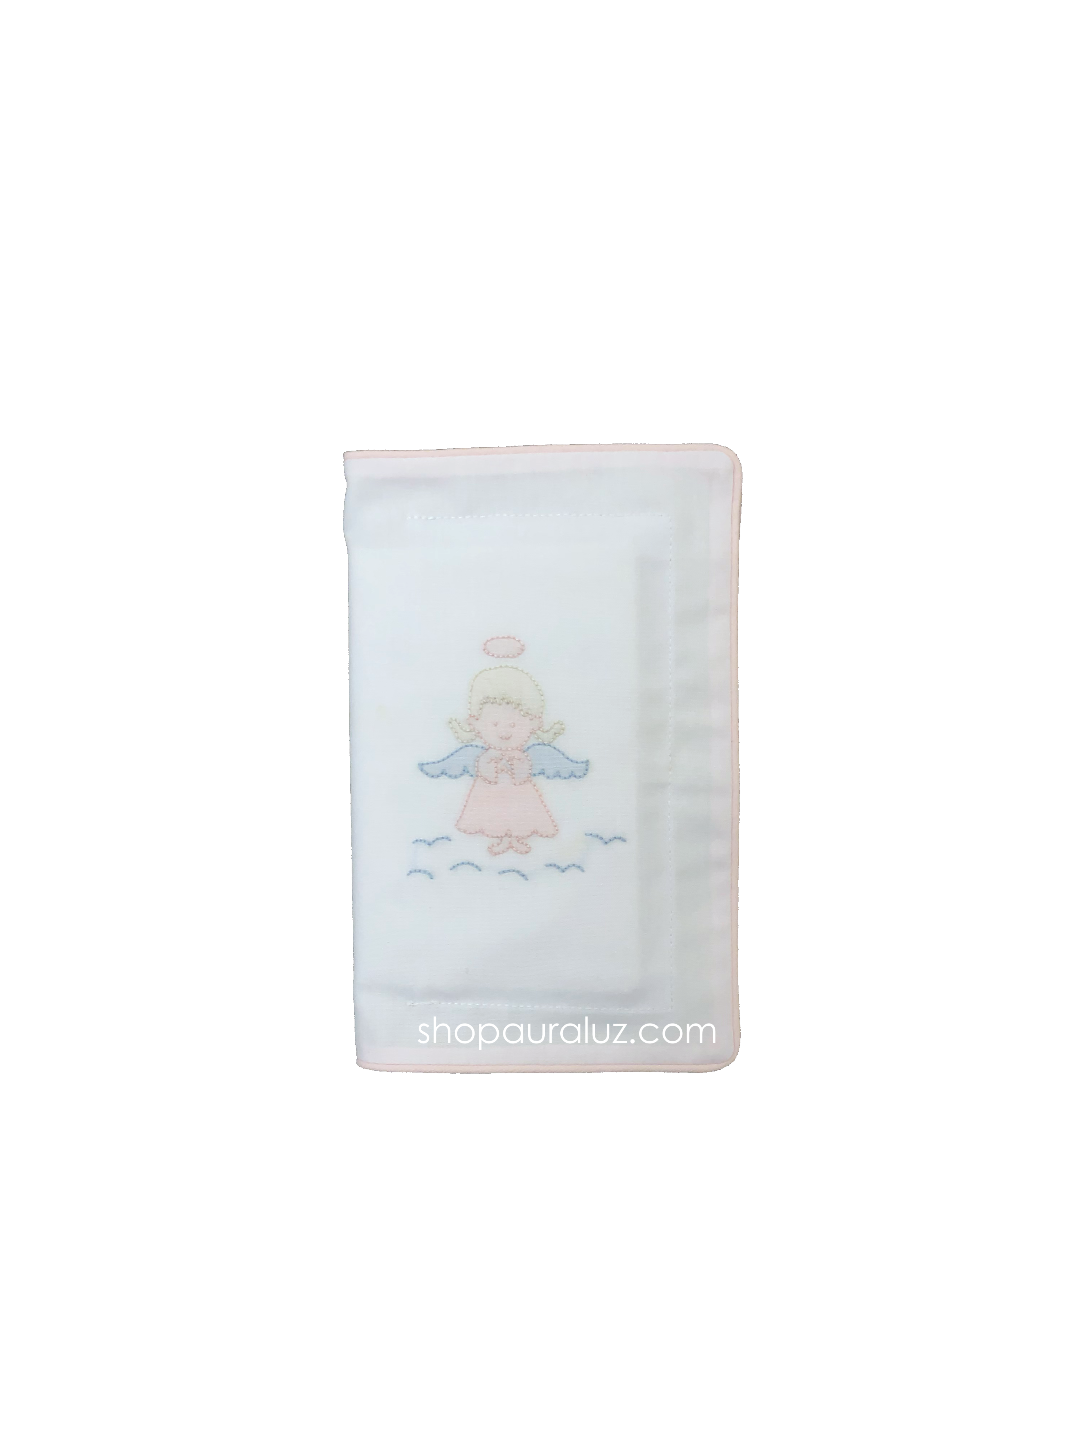 Auraluz Bible/Cover..White with pink piping trim and embroidered angel. STORE EXCLUSIVE!